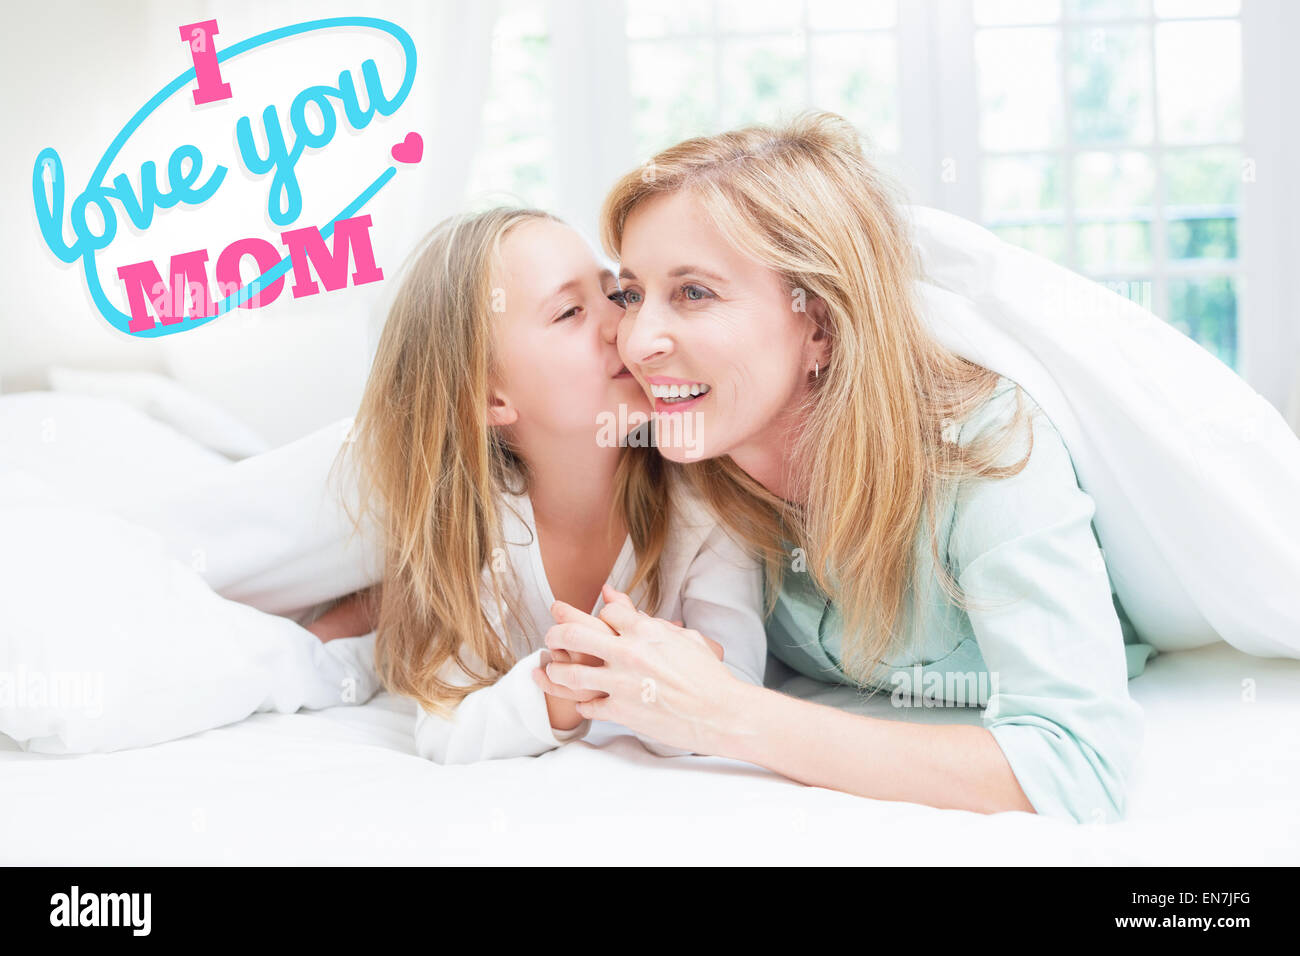 Composite image of mothers day greeting Stock Photo